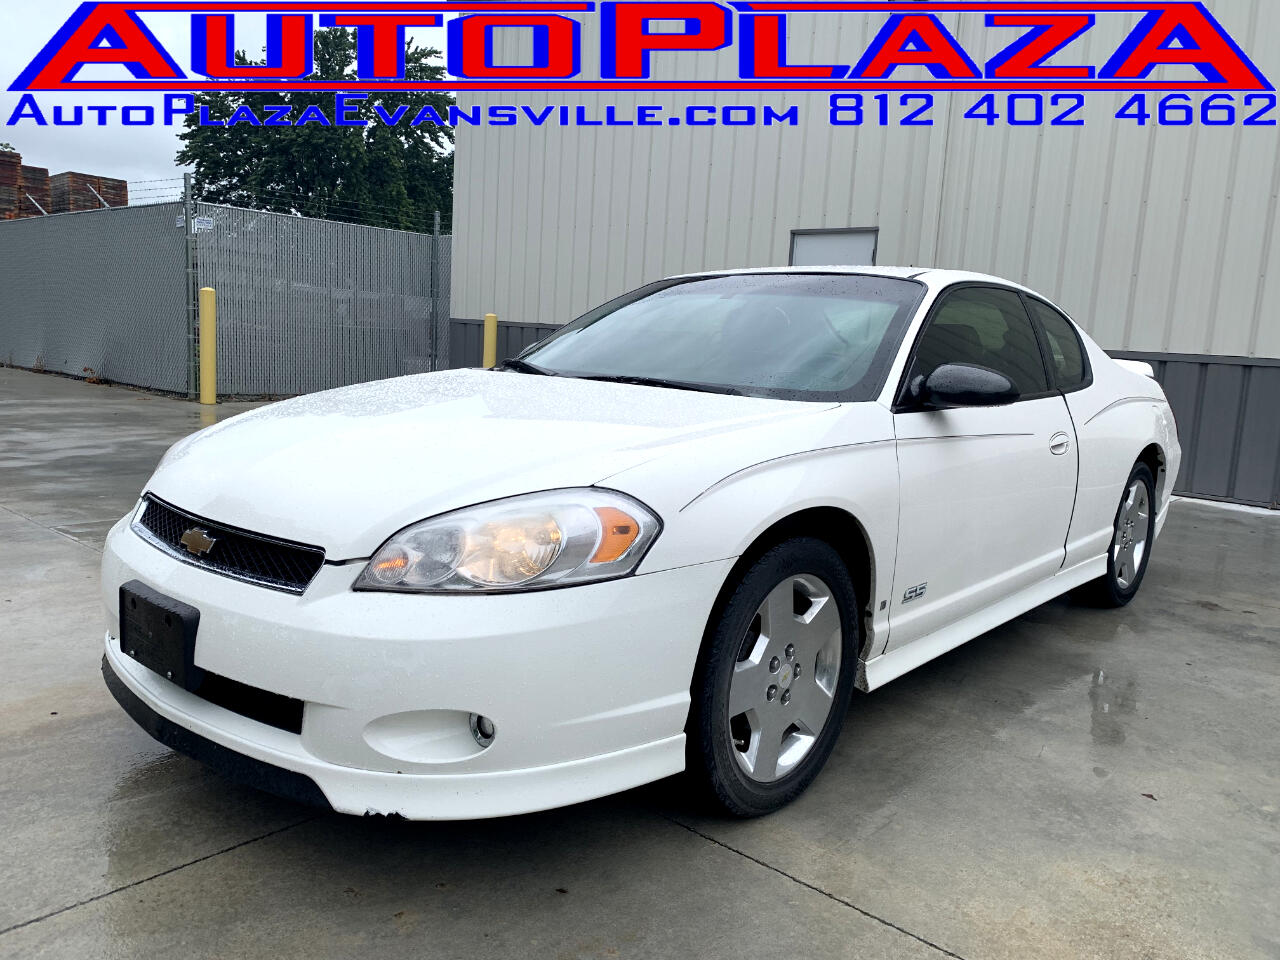 Used 2007 Chevrolet Monte Carlo Ss For Sale In Evansville In